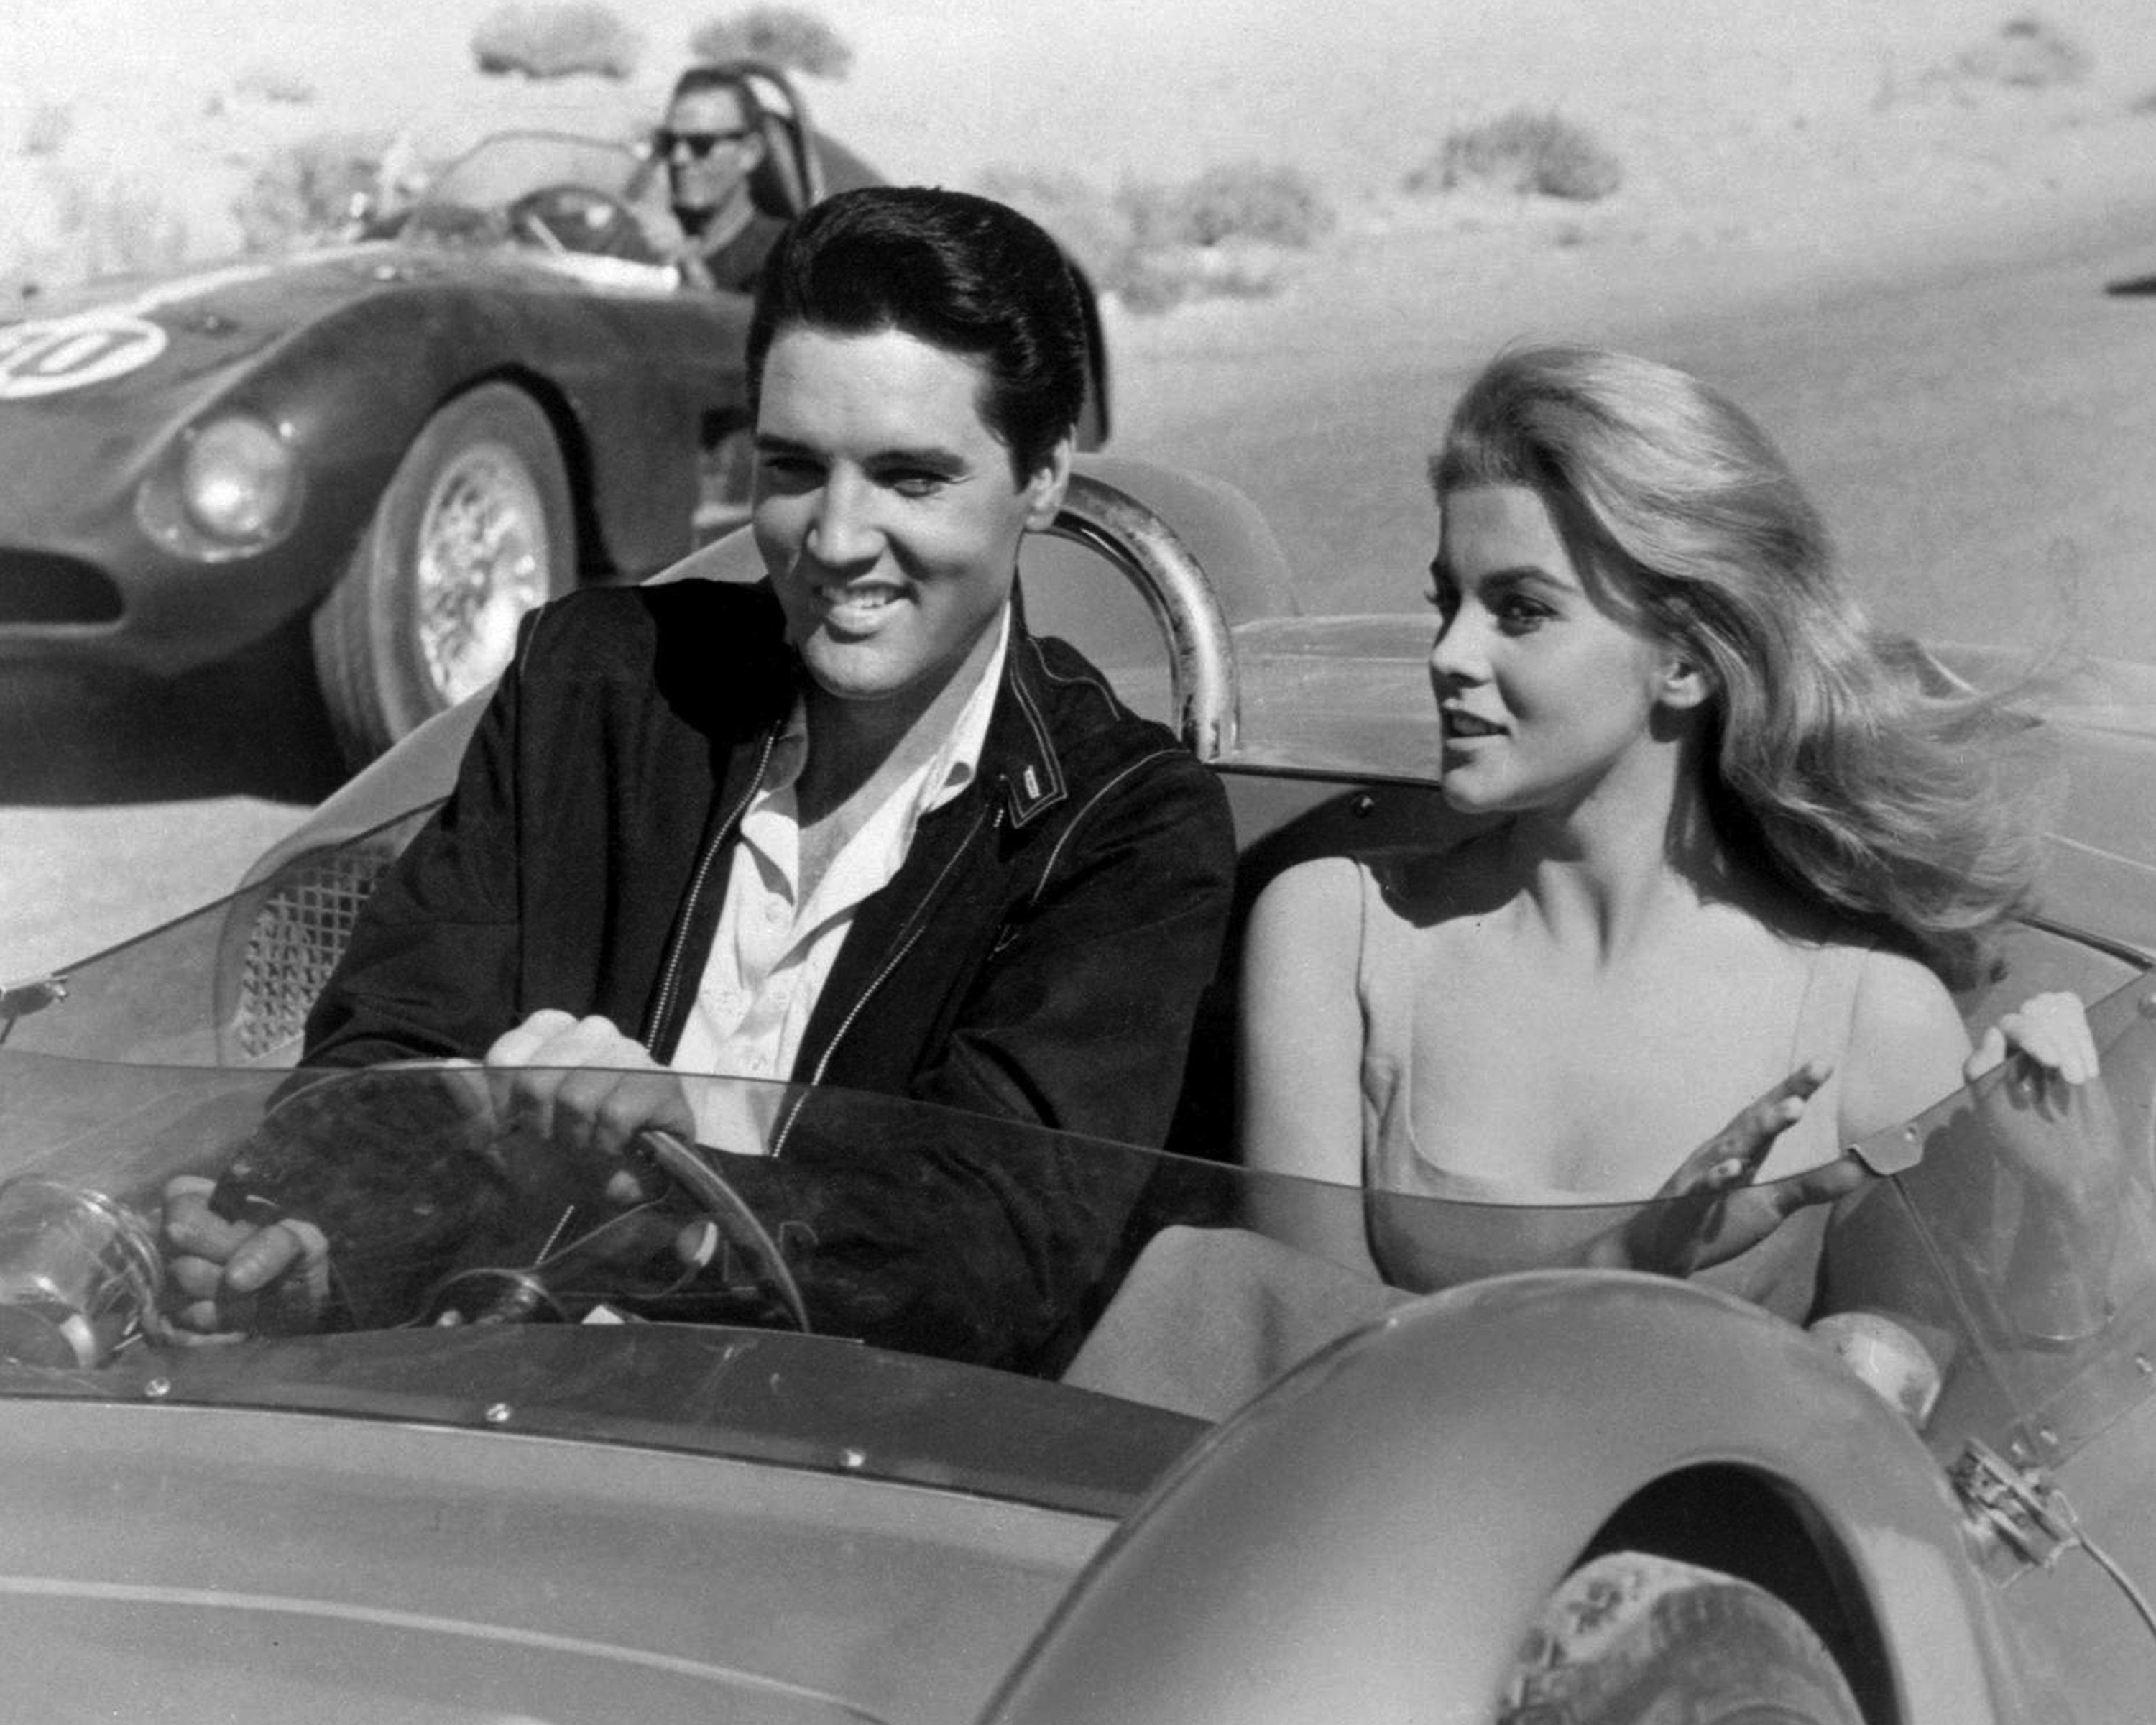 Elvis Presley driving a car with Ann-Margret in the passenger seat